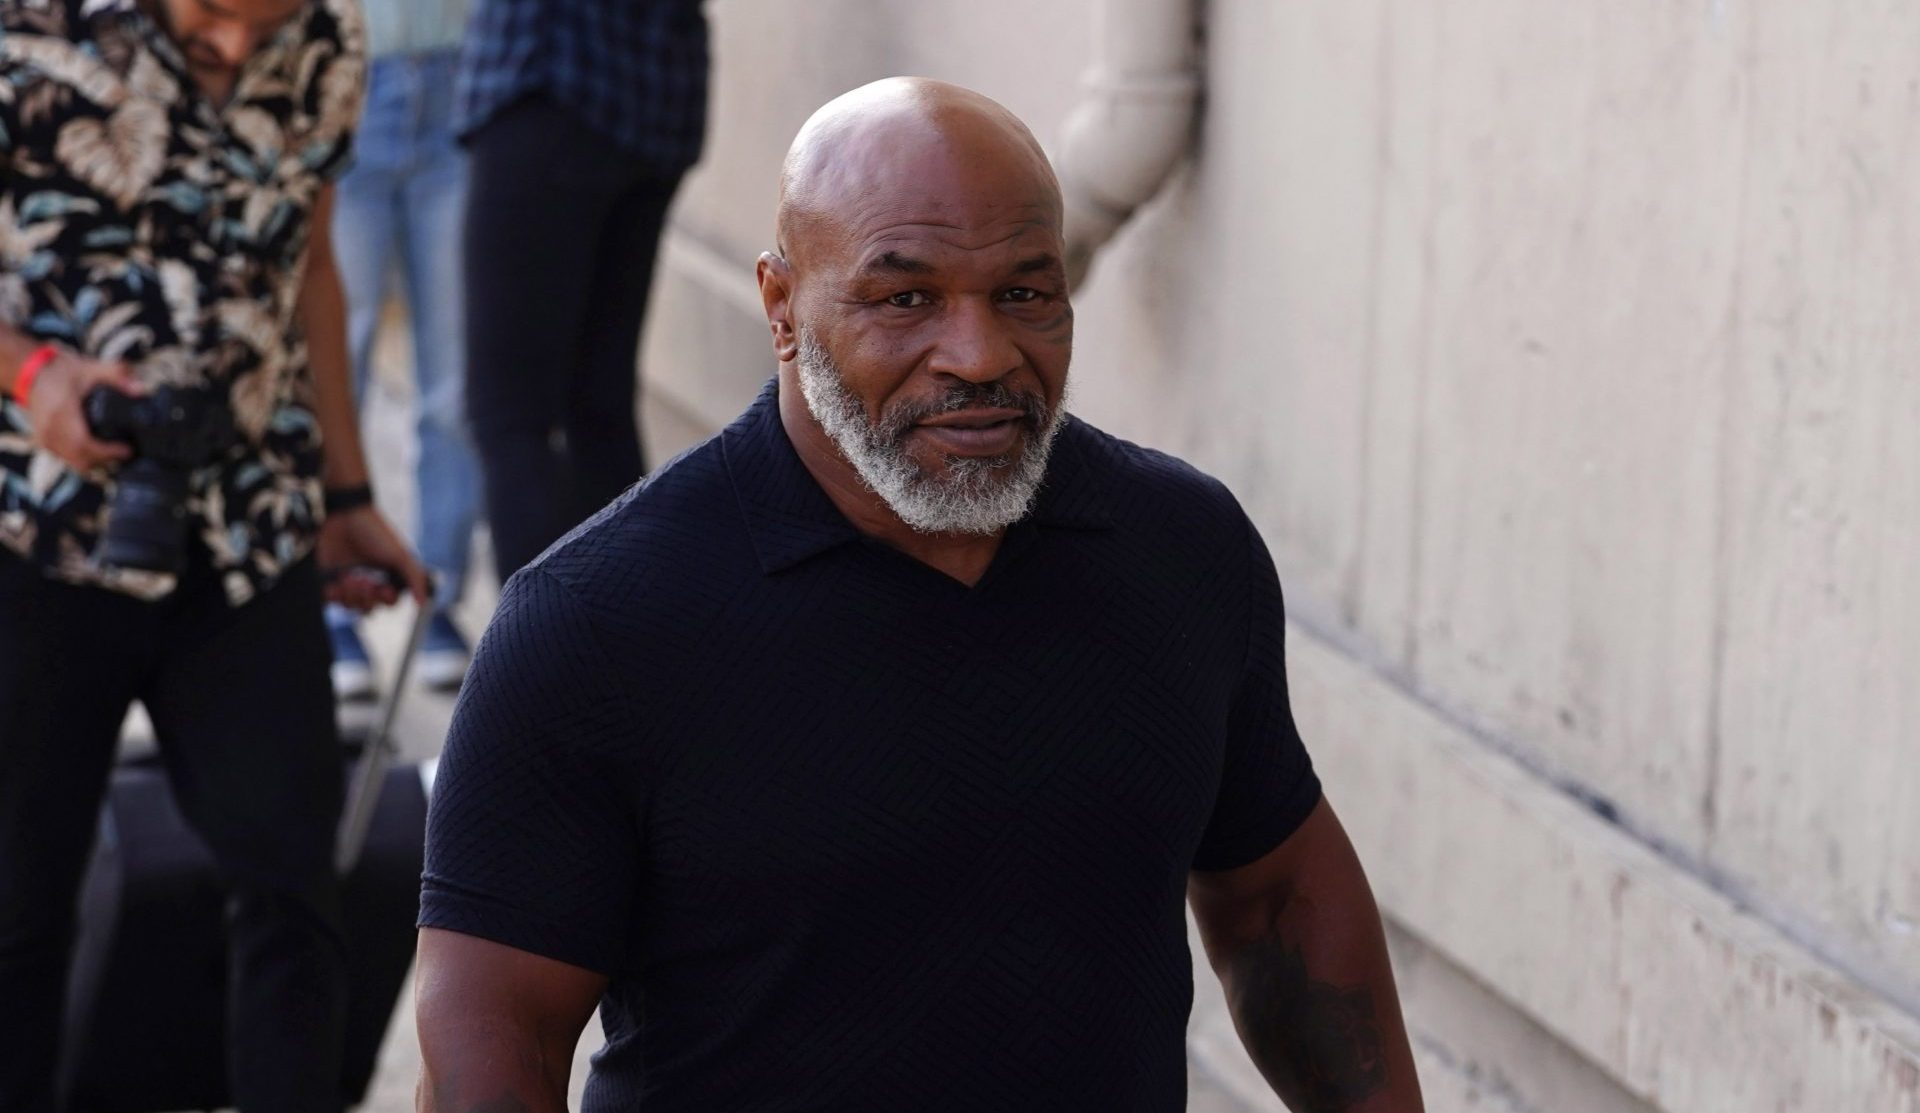 Mike Tyson Calls Hulu A Streaming "Slave Master" For Creating 'Mike' Series Without His Permission Or Paying Him